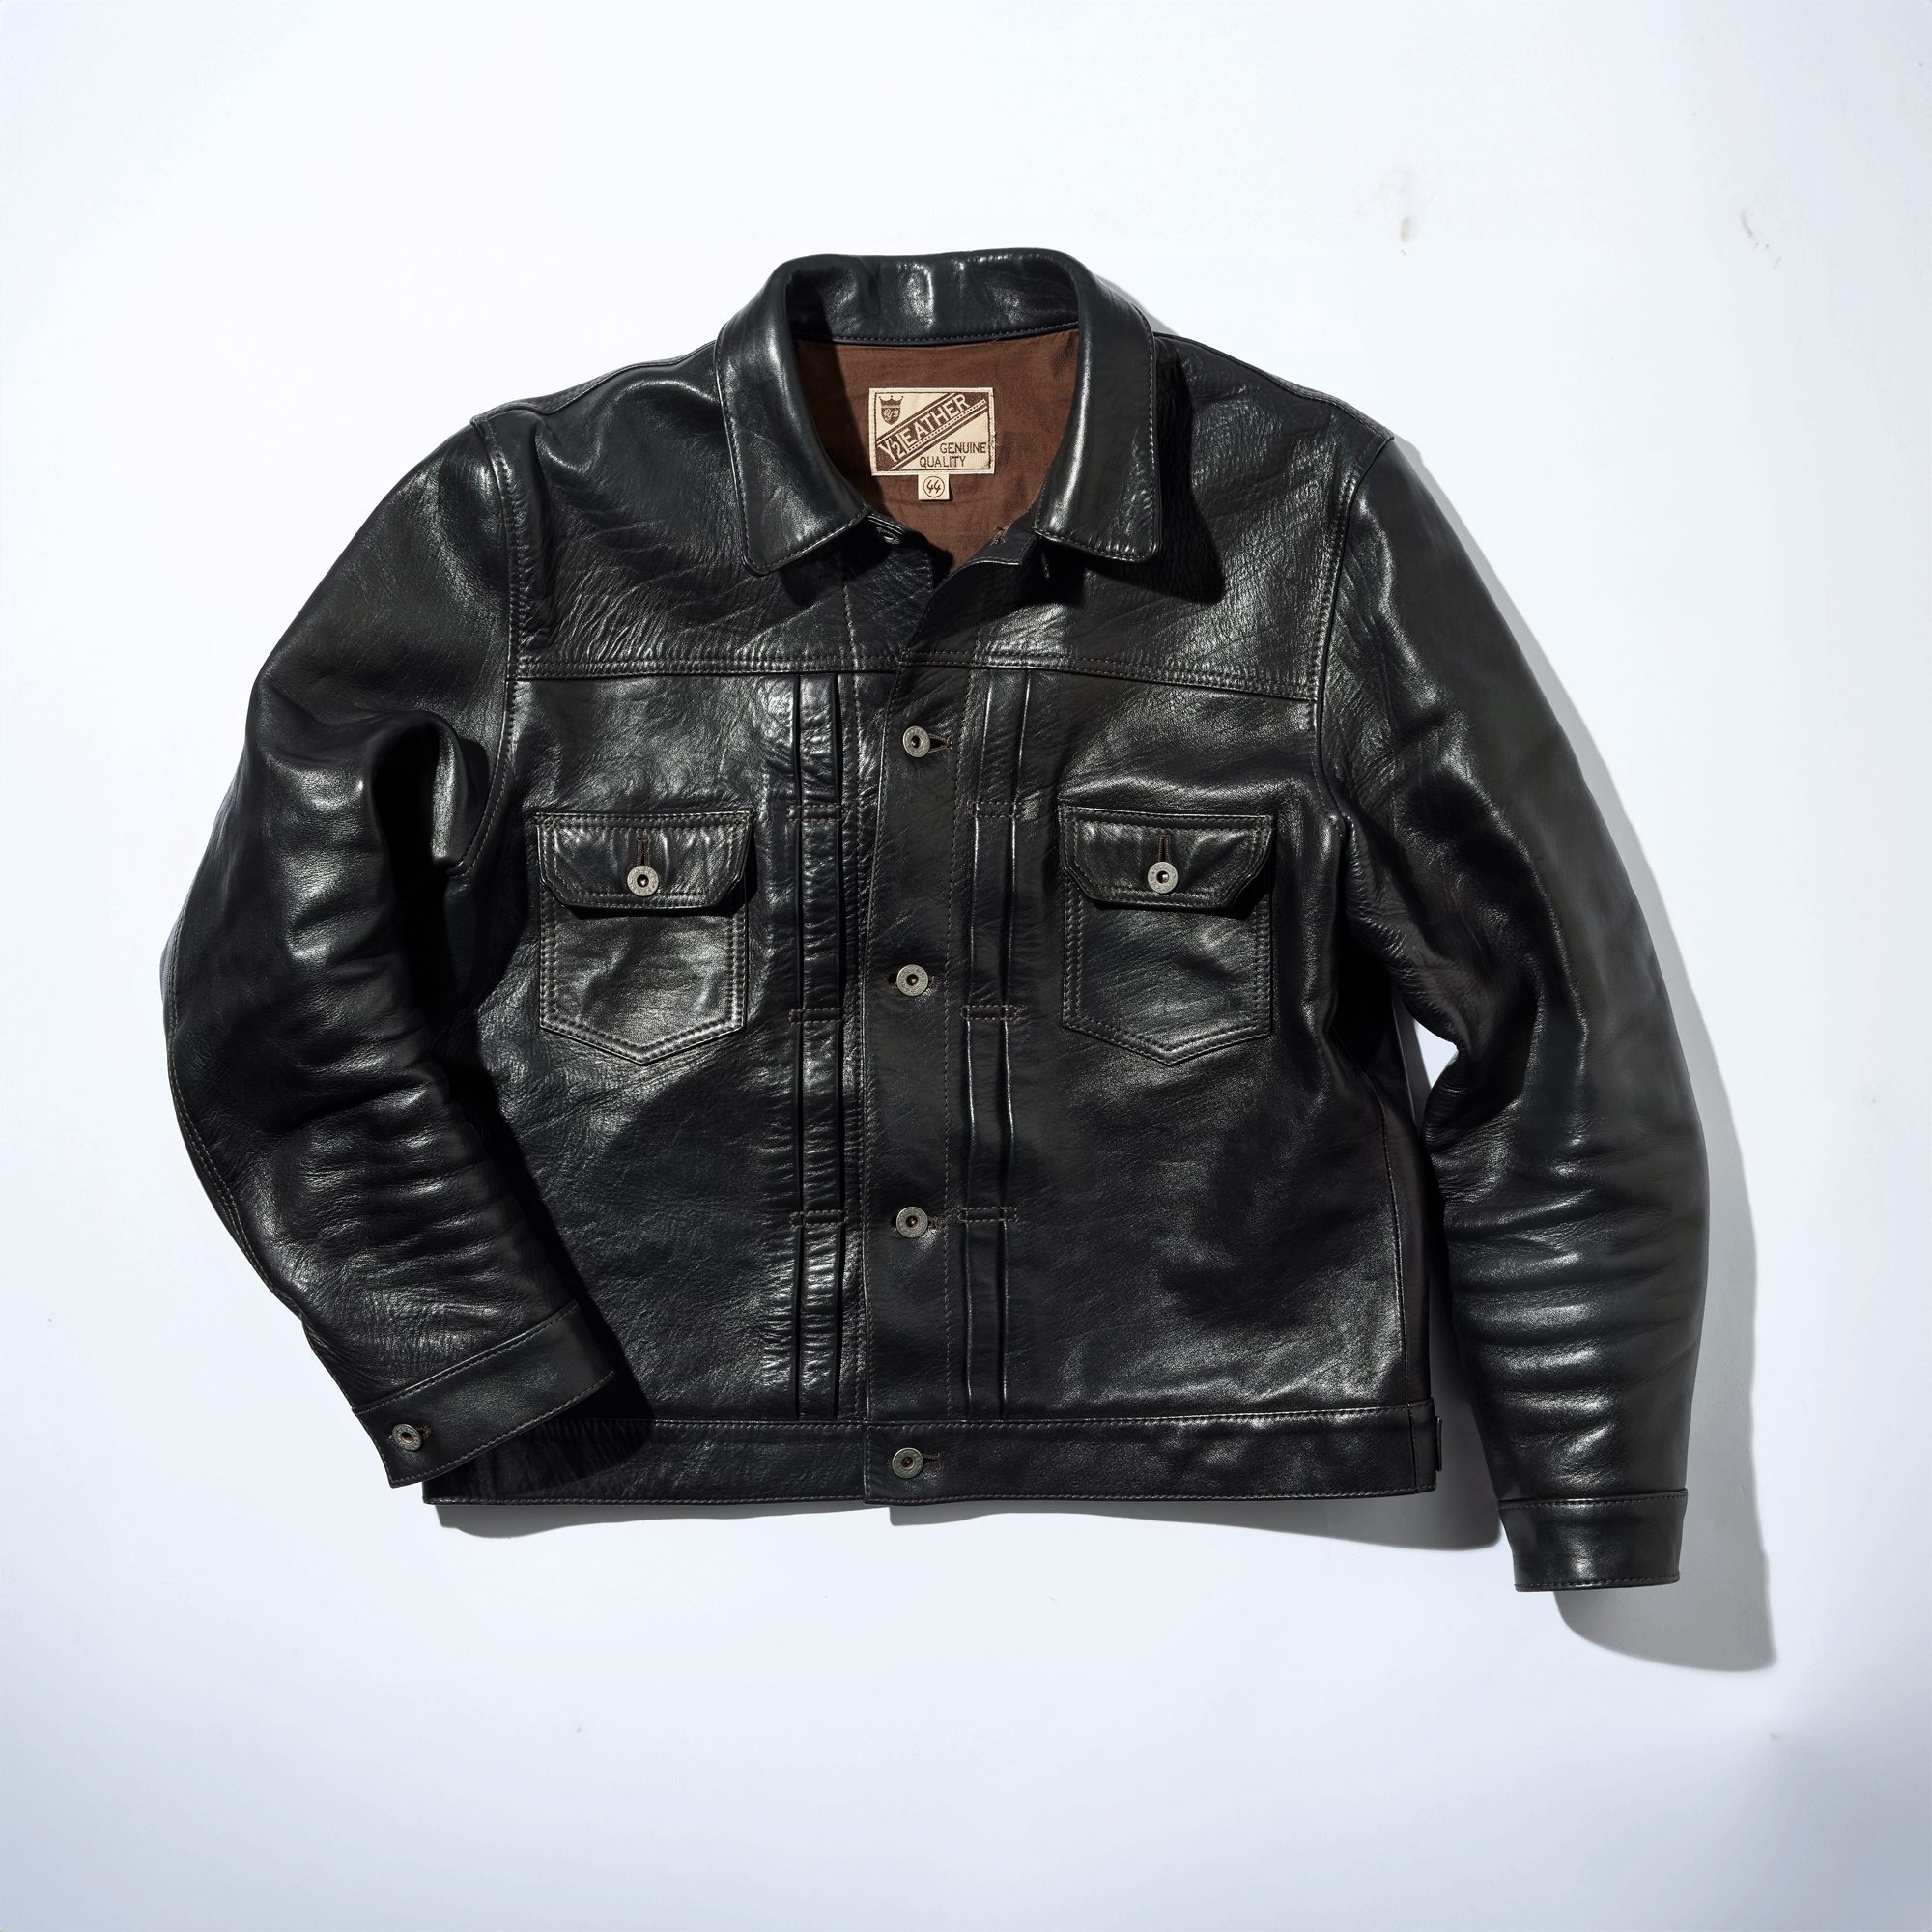 We will close our business for this fiscal year leather jacket brand